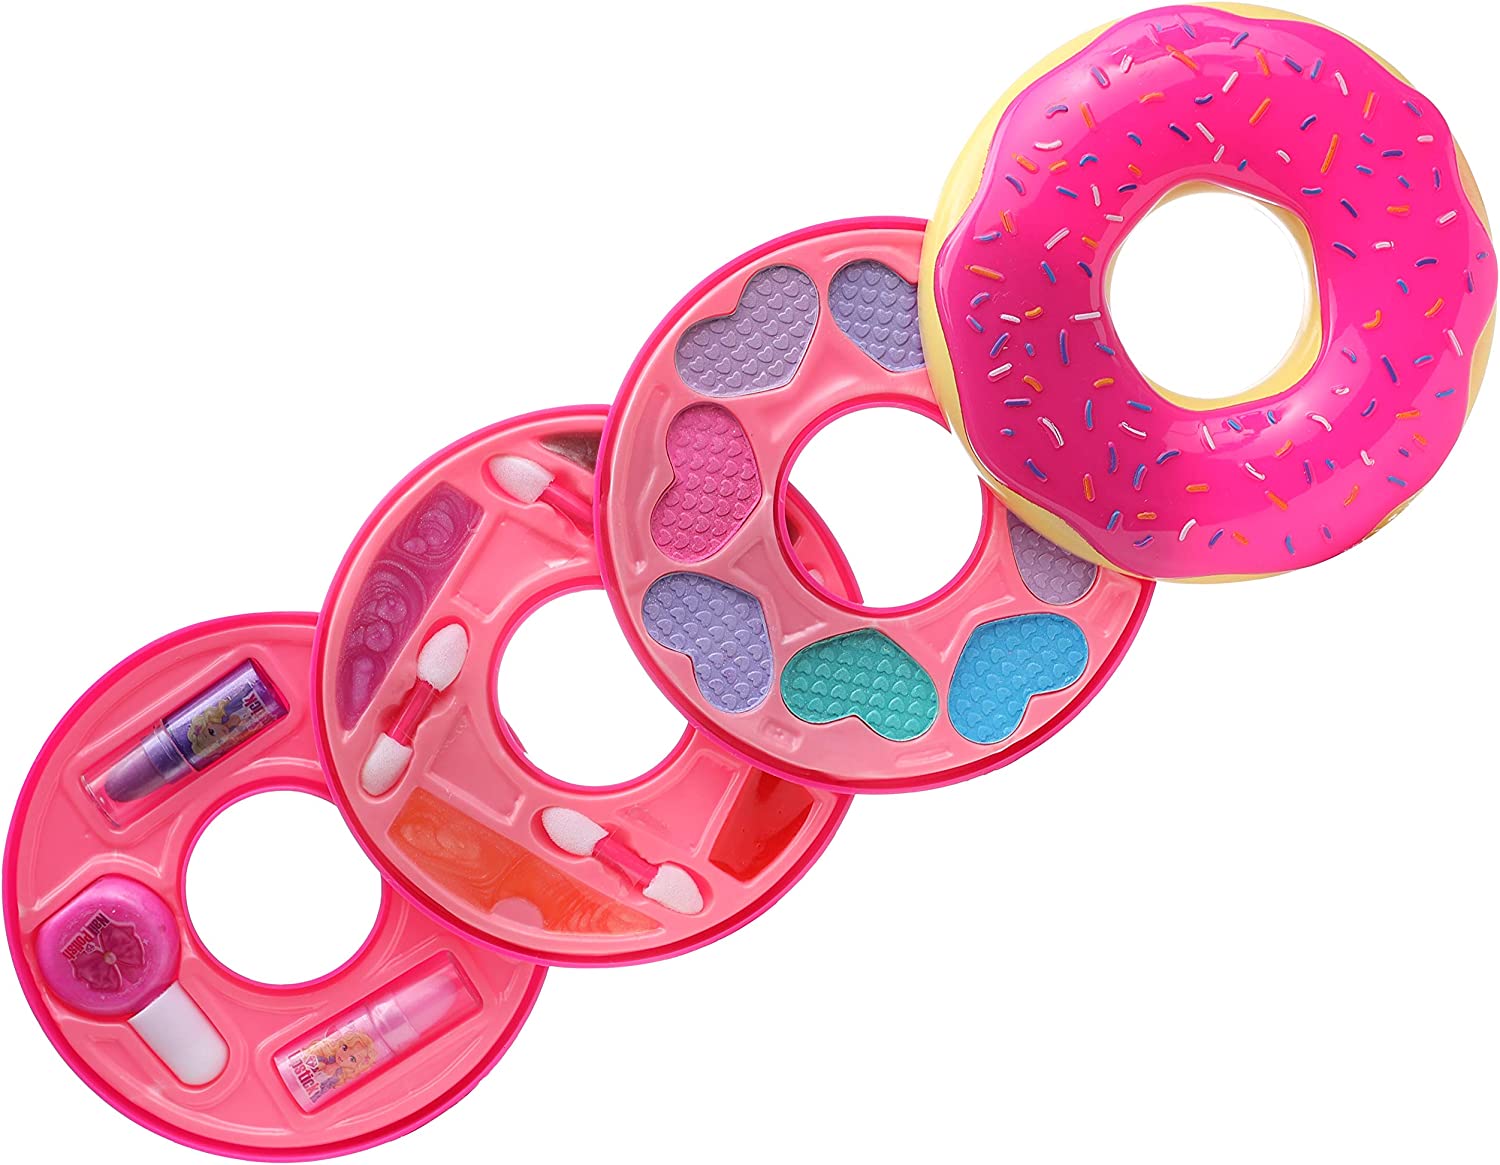 Princess Real Cosmetic Washable Kids Makeup Kit for Little Girls